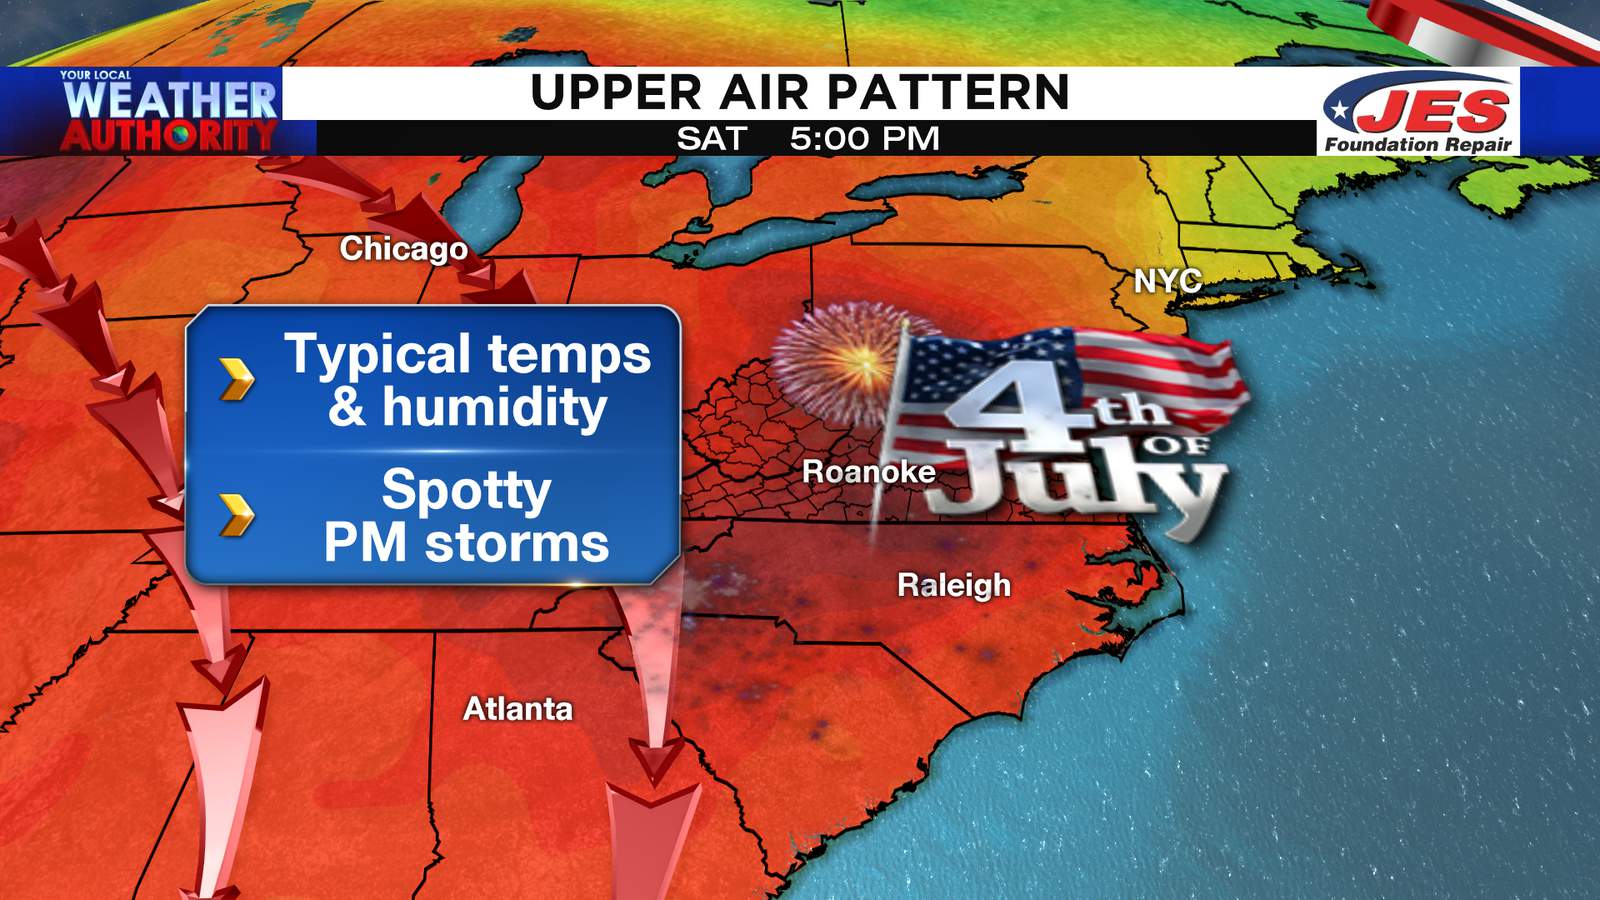 Heat, humidity wont practice social distancing the next several days